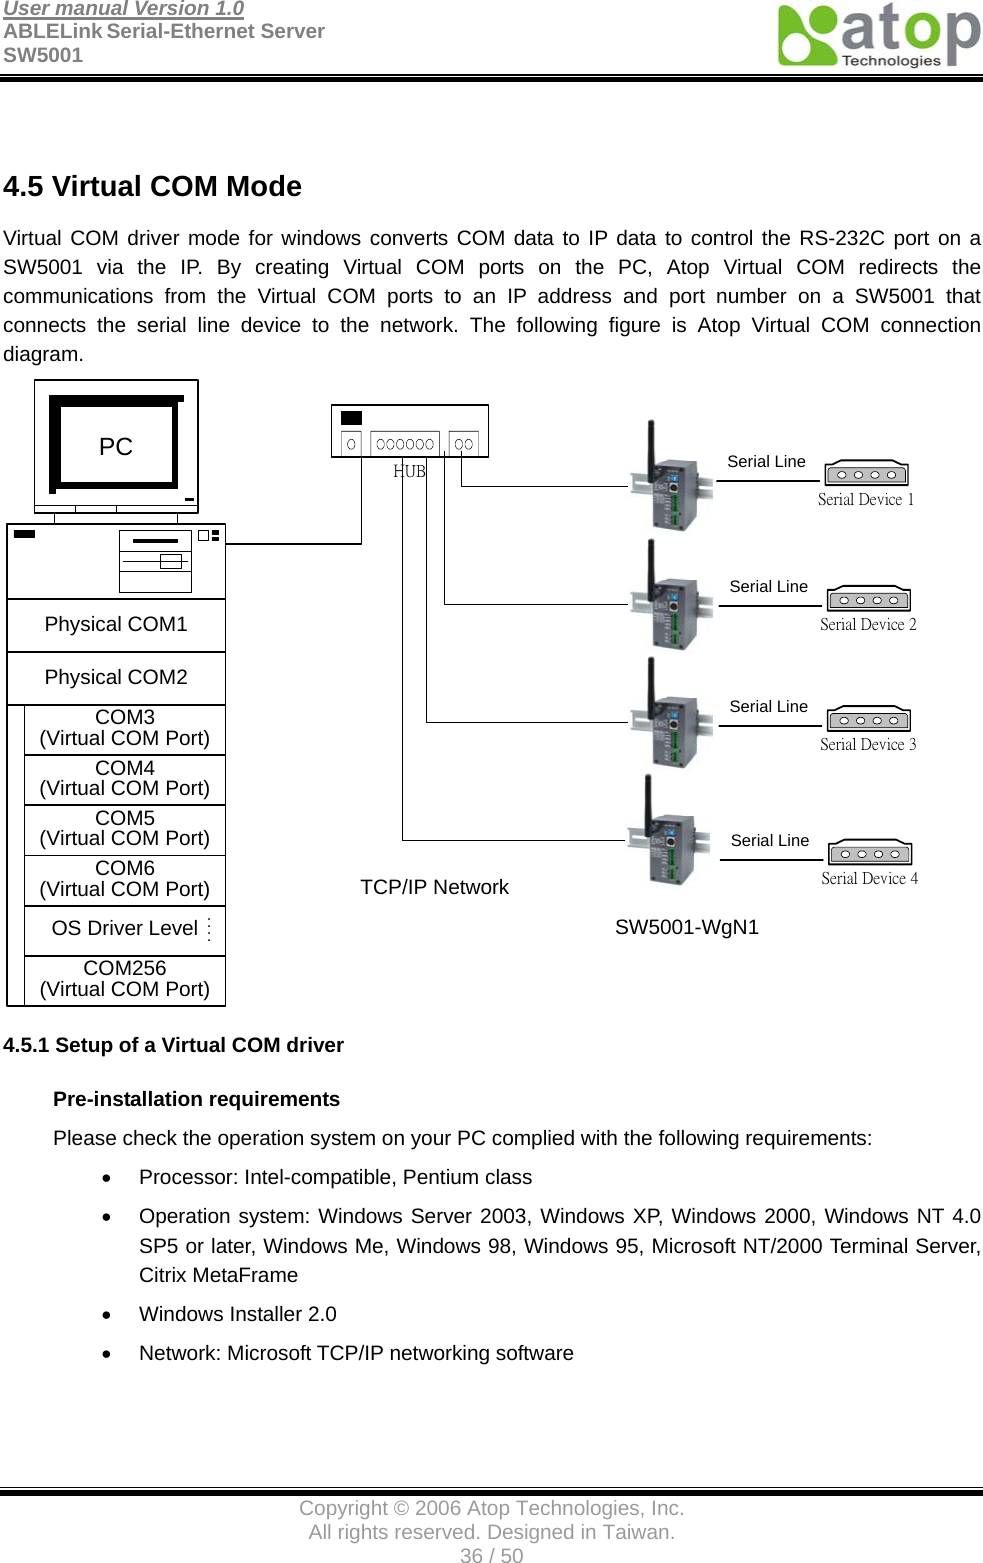 User manual Version 1.0 ABLELink Serial-Ethernet Server   SW5001                                        Copyright © 2006 Atop Technologies, Inc. All rights reserved. Designed in Taiwan. 36 / 50    4.5 Virtual COM Mode Virtual COM driver mode for windows converts COM data to IP data to control the RS-232C port on a SW5001 via the IP. By creating Virtual COM ports on the PC, Atop Virtual COM redirects the communications from the Virtual COM ports to an IP address and port number on a SW5001 that connects the serial line device to the network. The following figure is Atop Virtual COM connection diagram. Physical COM1Physical COM2COM3(Virtual COM Port)COM4(Virtual COM Port)COM5(Virtual COM Port)COM6(Virtual COM Port)OS Driver LevelCOM256(Virtual COM Port)PC::HUBTCP/IP NetworkSerial LineSerial Device 1Serial LineSerial Device 2Serial LineSerial Device 3Serial LineSerial Device 4SW5001-WgN1 4.5.1 Setup of a Virtual COM driver Pre-installation requirements   Please check the operation system on your PC complied with the following requirements: •  Processor: Intel-compatible, Pentium class •  Operation system: Windows Server 2003, Windows XP, Windows 2000, Windows NT 4.0 SP5 or later, Windows Me, Windows 98, Windows 95, Microsoft NT/2000 Terminal Server, Citrix MetaFrame •  Windows Installer 2.0 •  Network: Microsoft TCP/IP networking software 